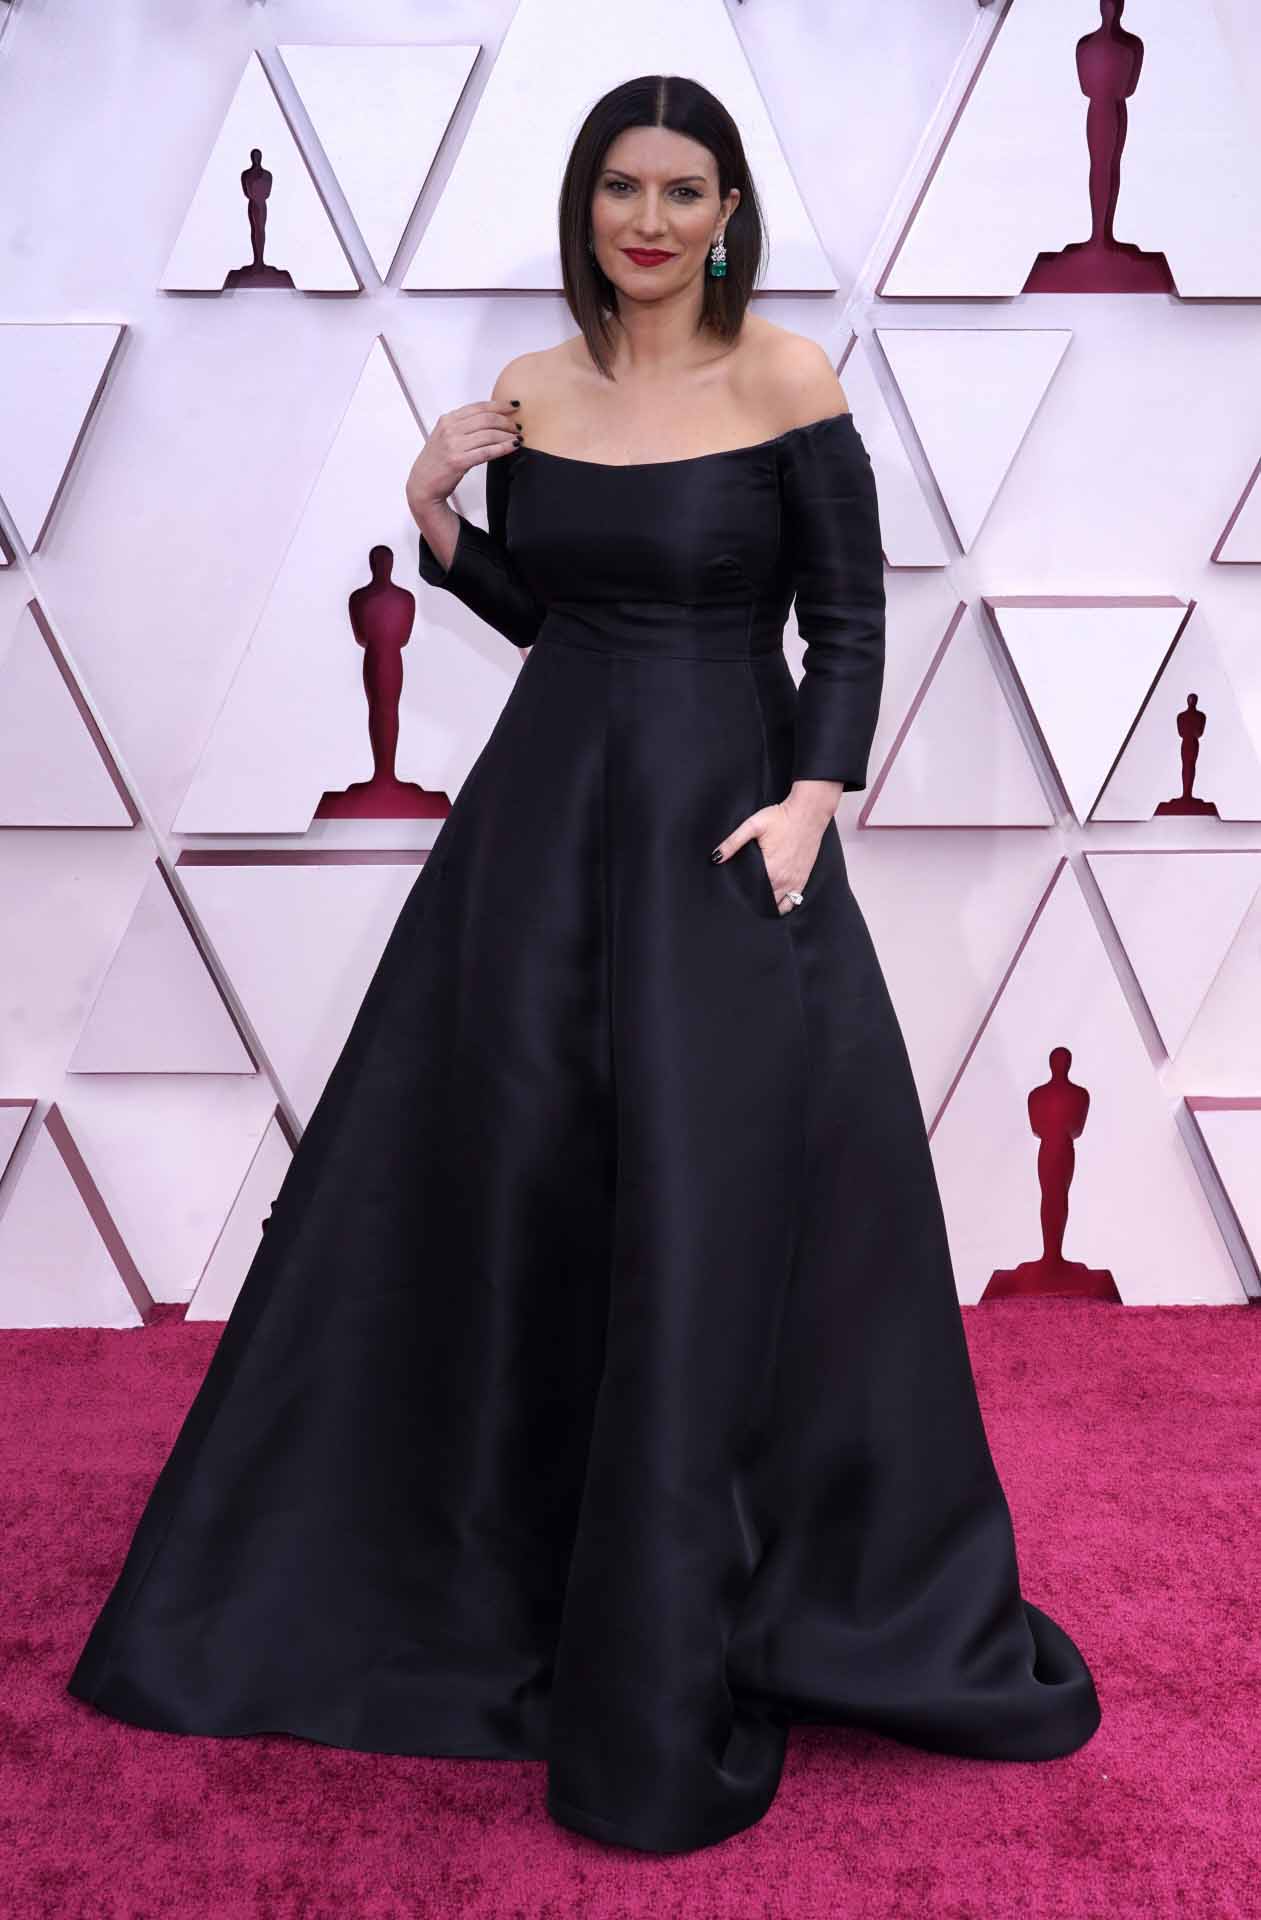 Singer Laura Pausini arriving to the Oscars during the 93rd Academy Awards in Los Angeles, California, U.S., April 25, 2021.